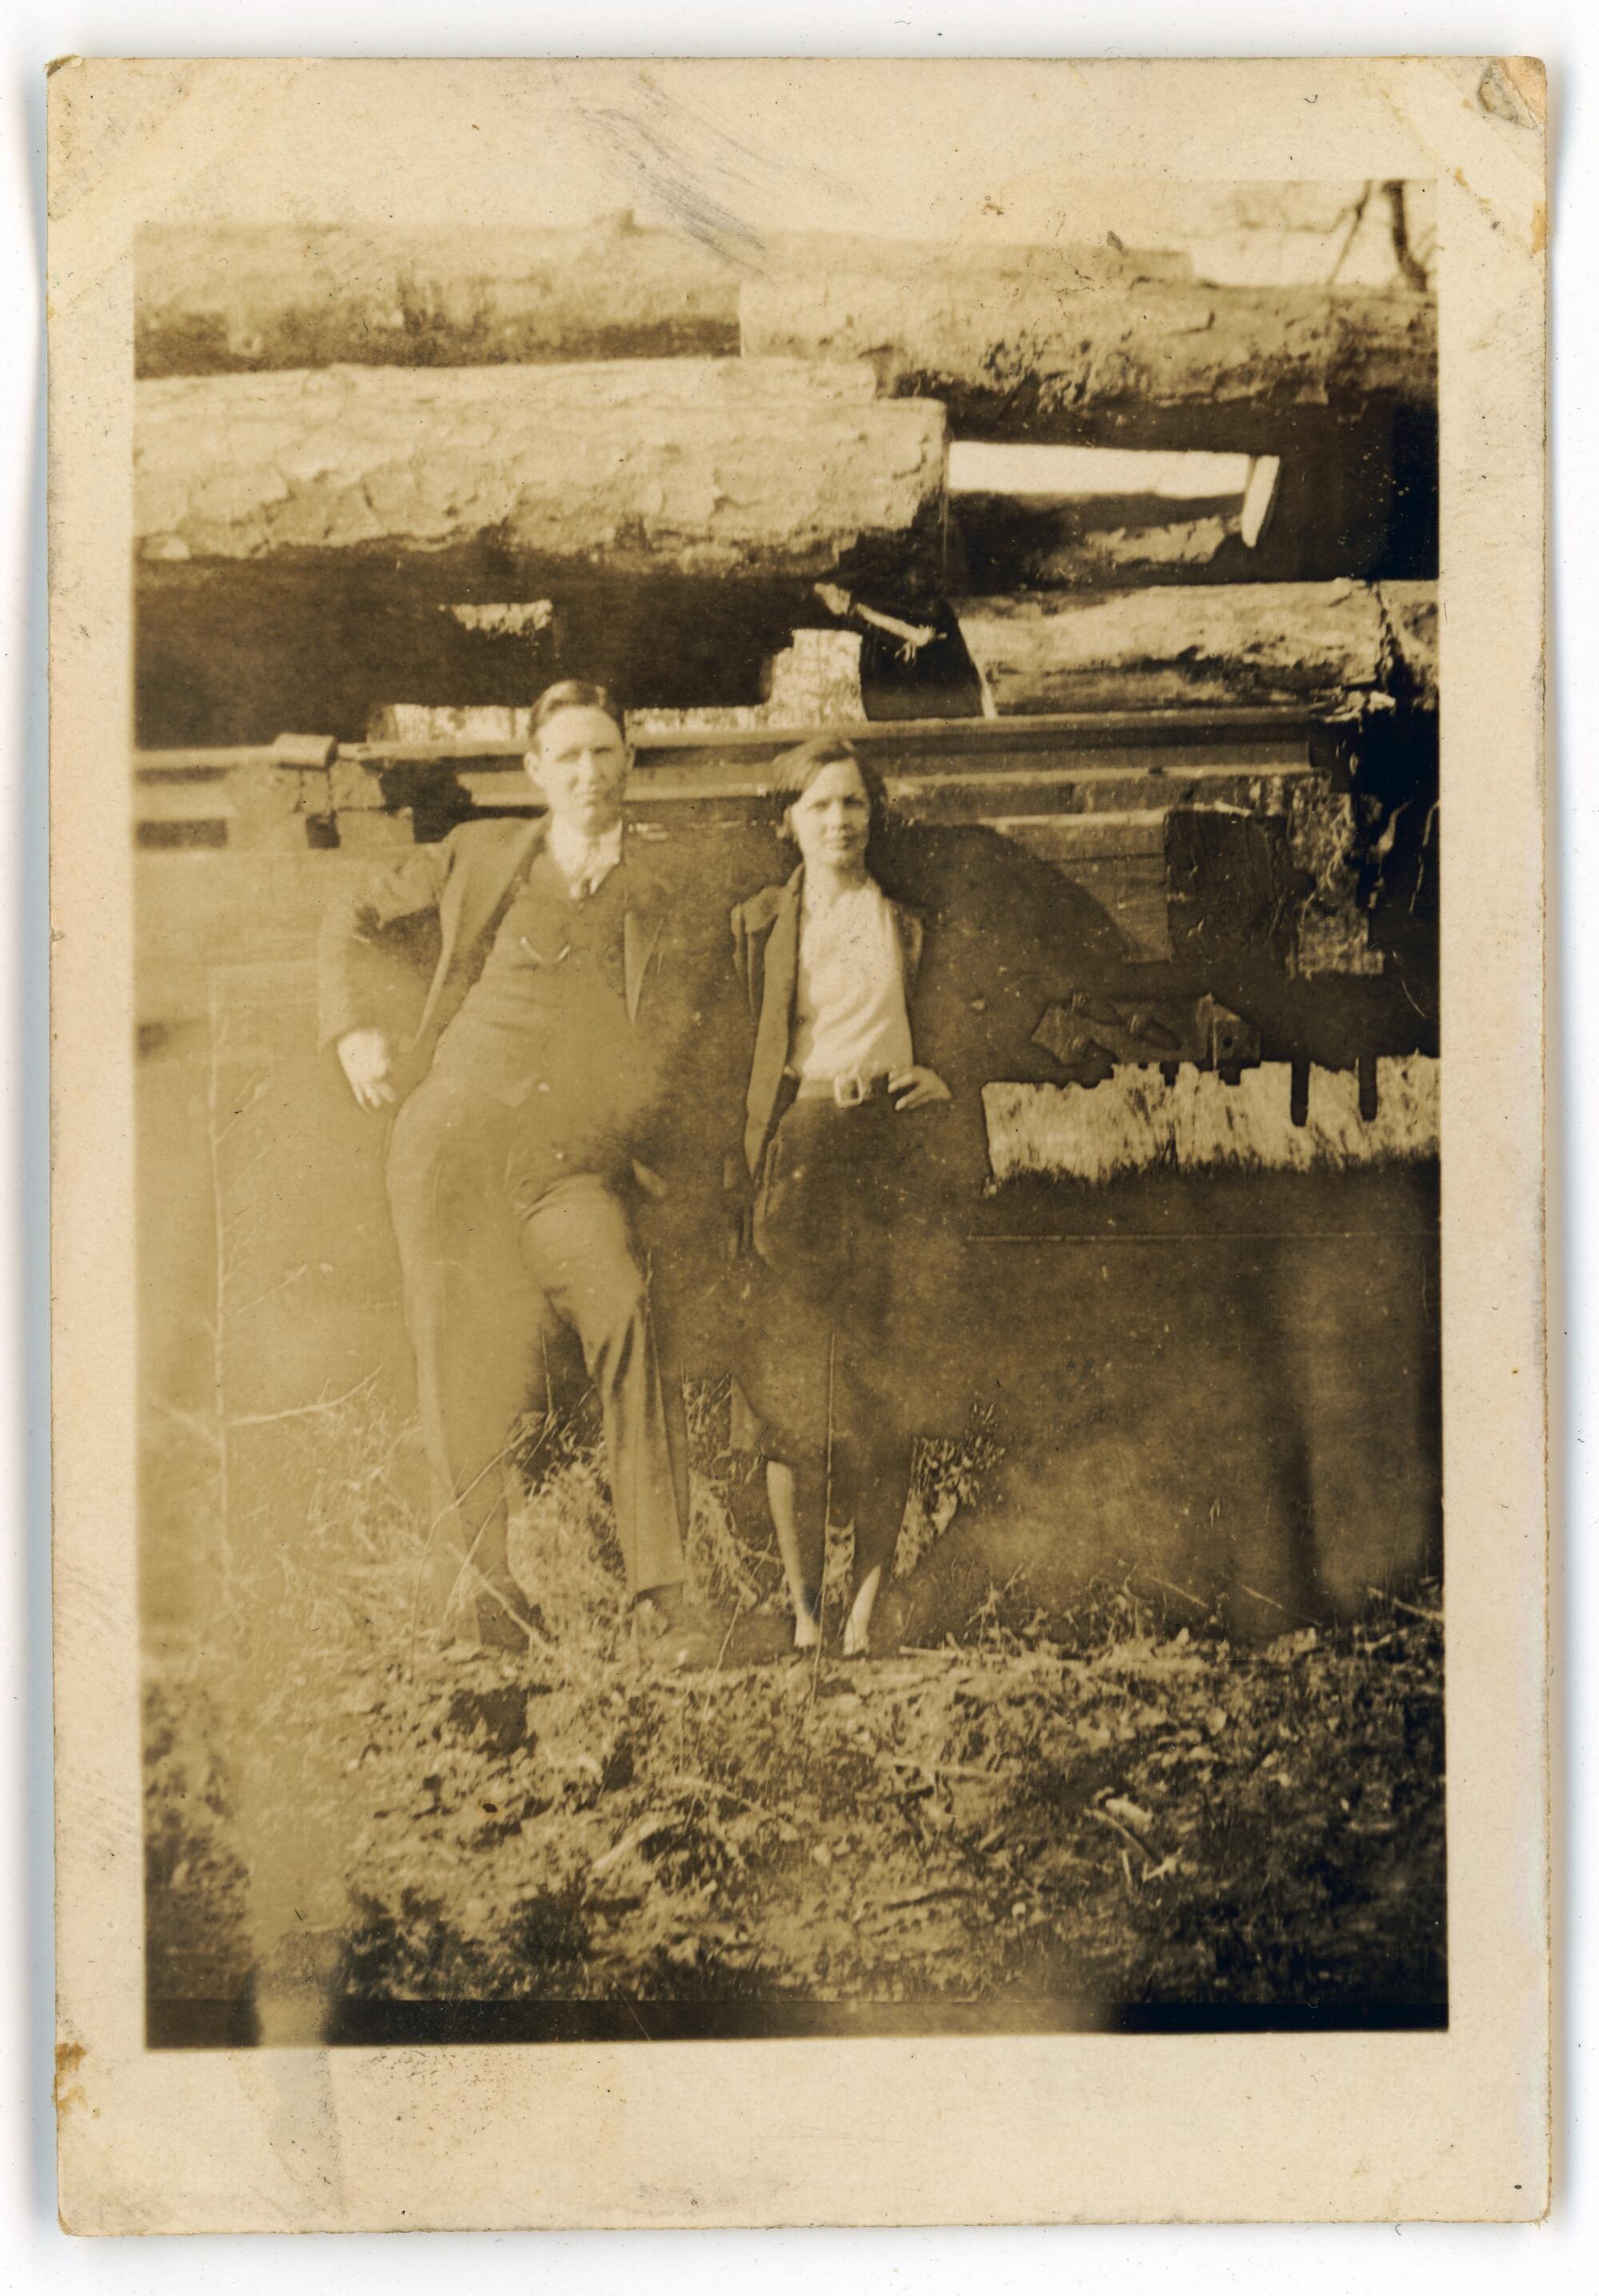 A man and a woman surrounded by farmland in a very old, yellowed photo.